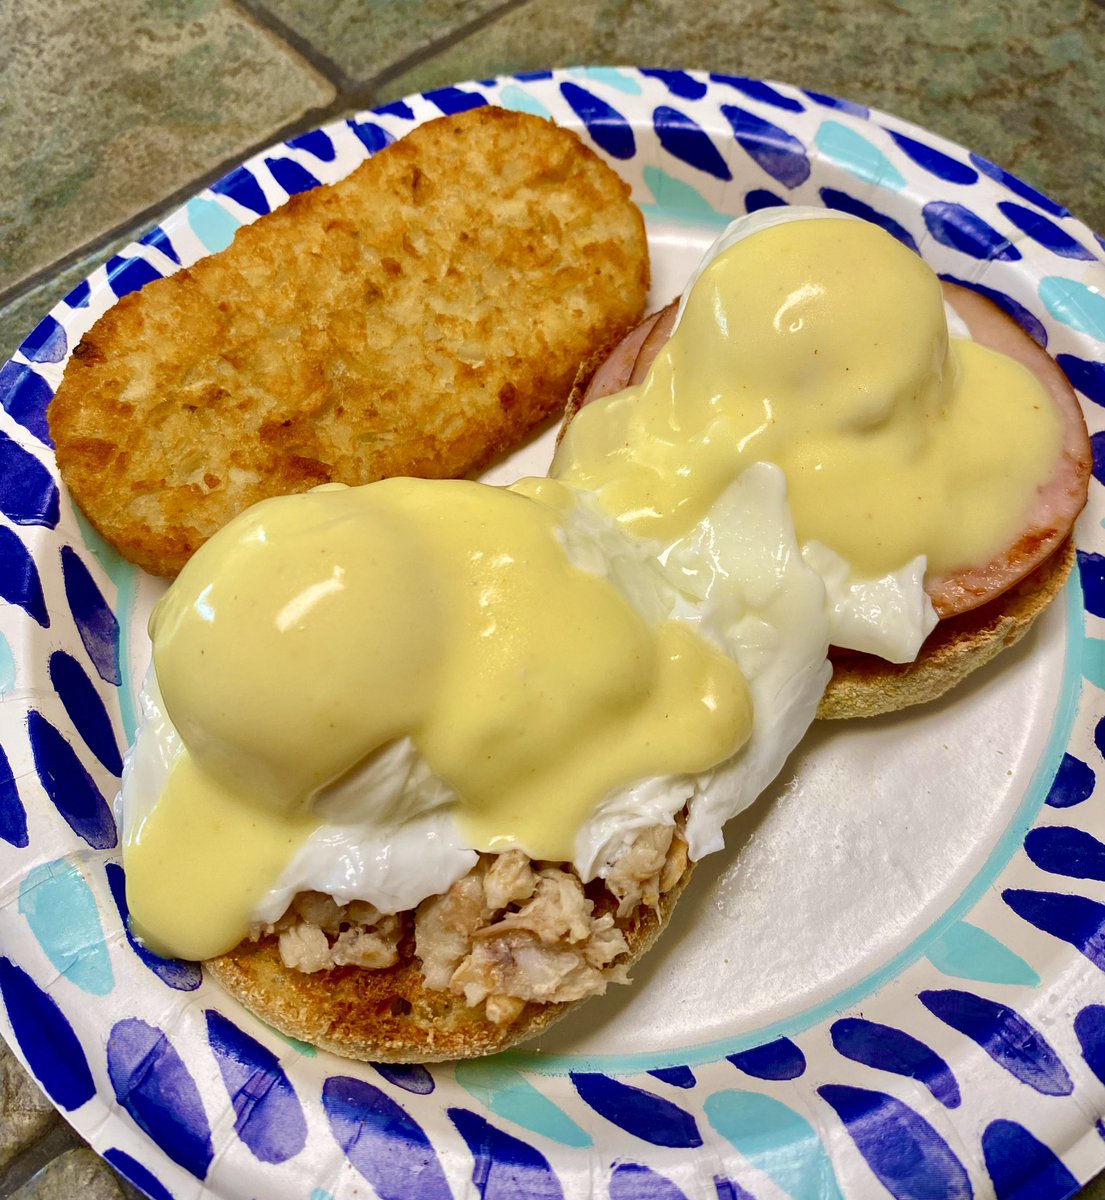 Made some classic and crab Benedict for Mrs. of the Empire’s Mother’s Day breakfast. #MothersDay #eggsbenedict